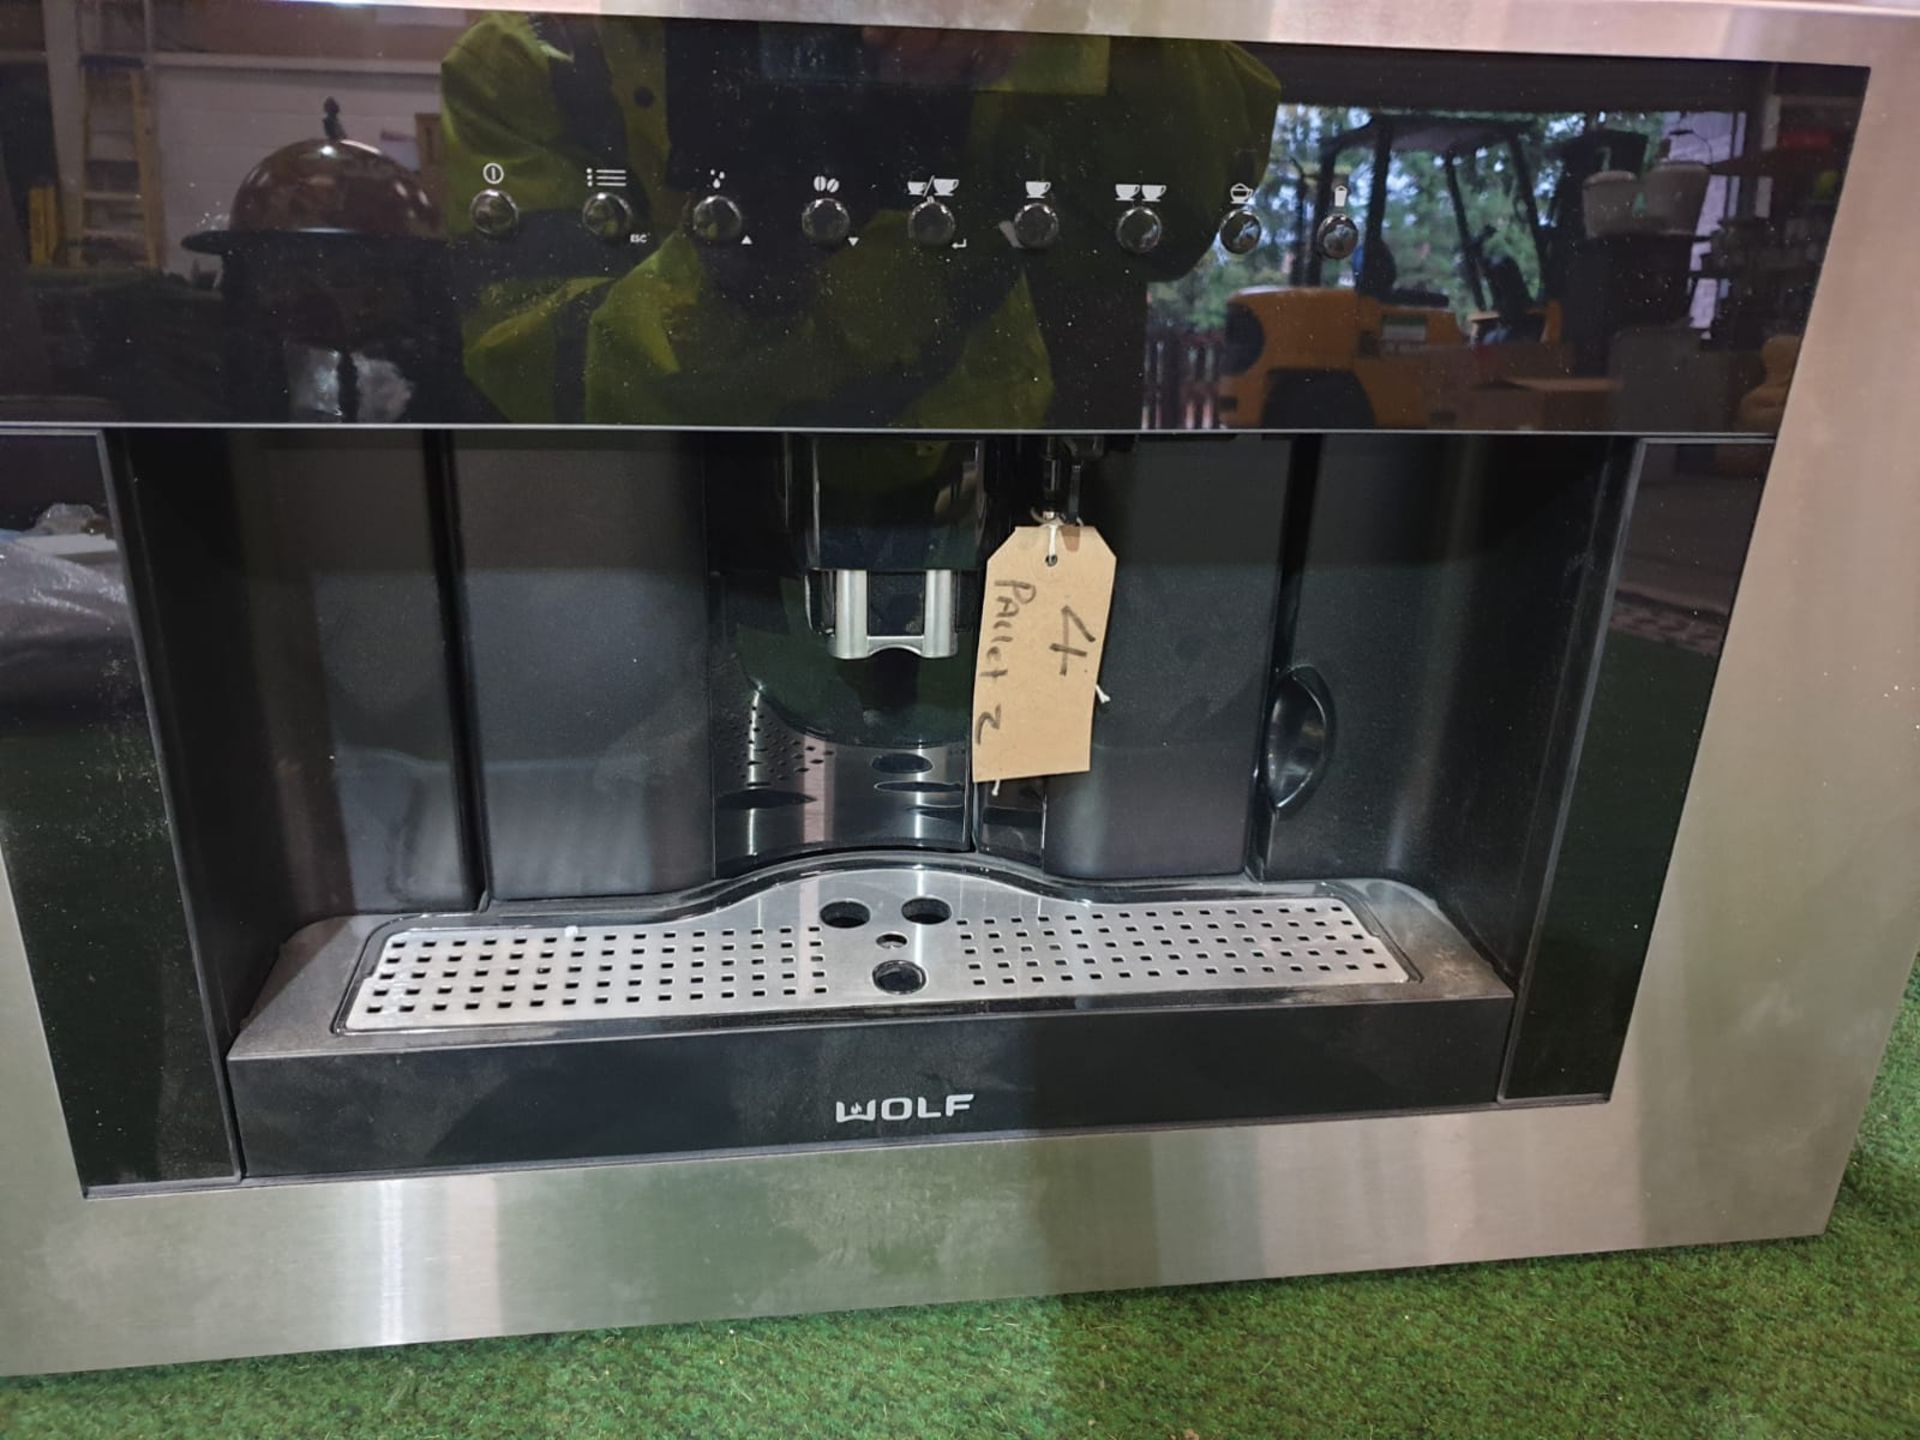 Wolf ICBEC30TM-B Built In Coffee Machine - Stainless Steel The M Series Transitional Coffee System - Image 2 of 3